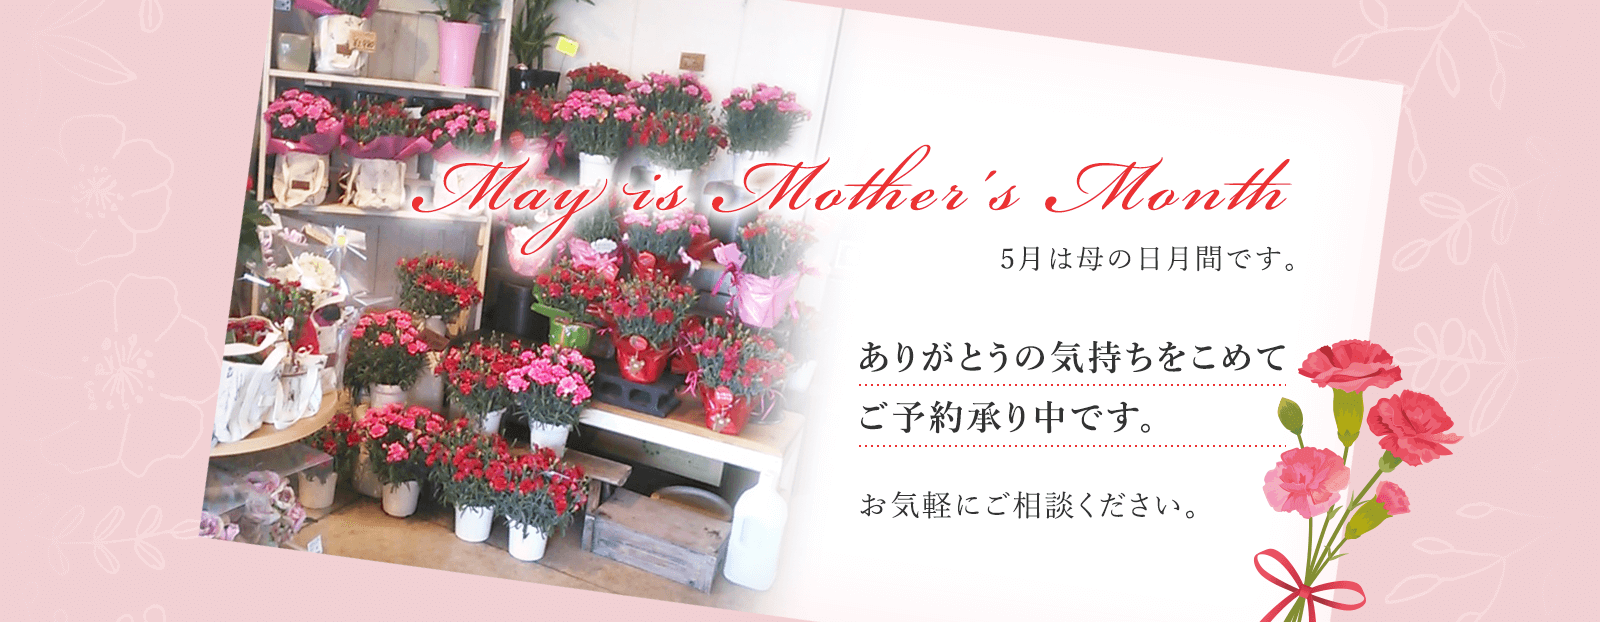 May is Mother's Month